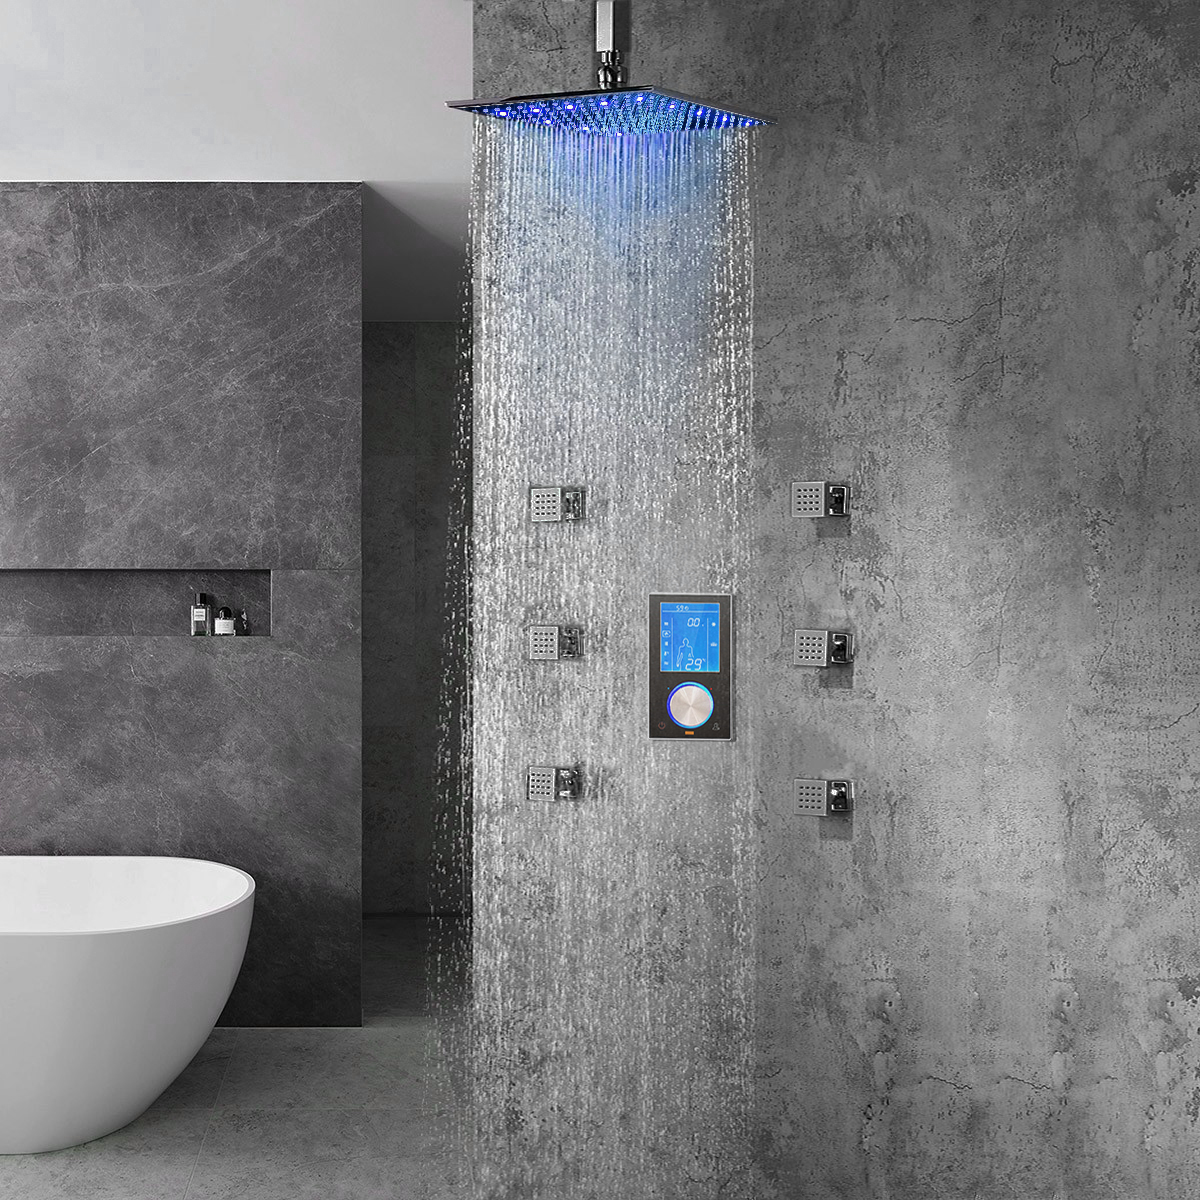 Romo Solid Brass Color Changing LED Rain Shower Head with Digital Mixer and 360 Adjustable Body Jets